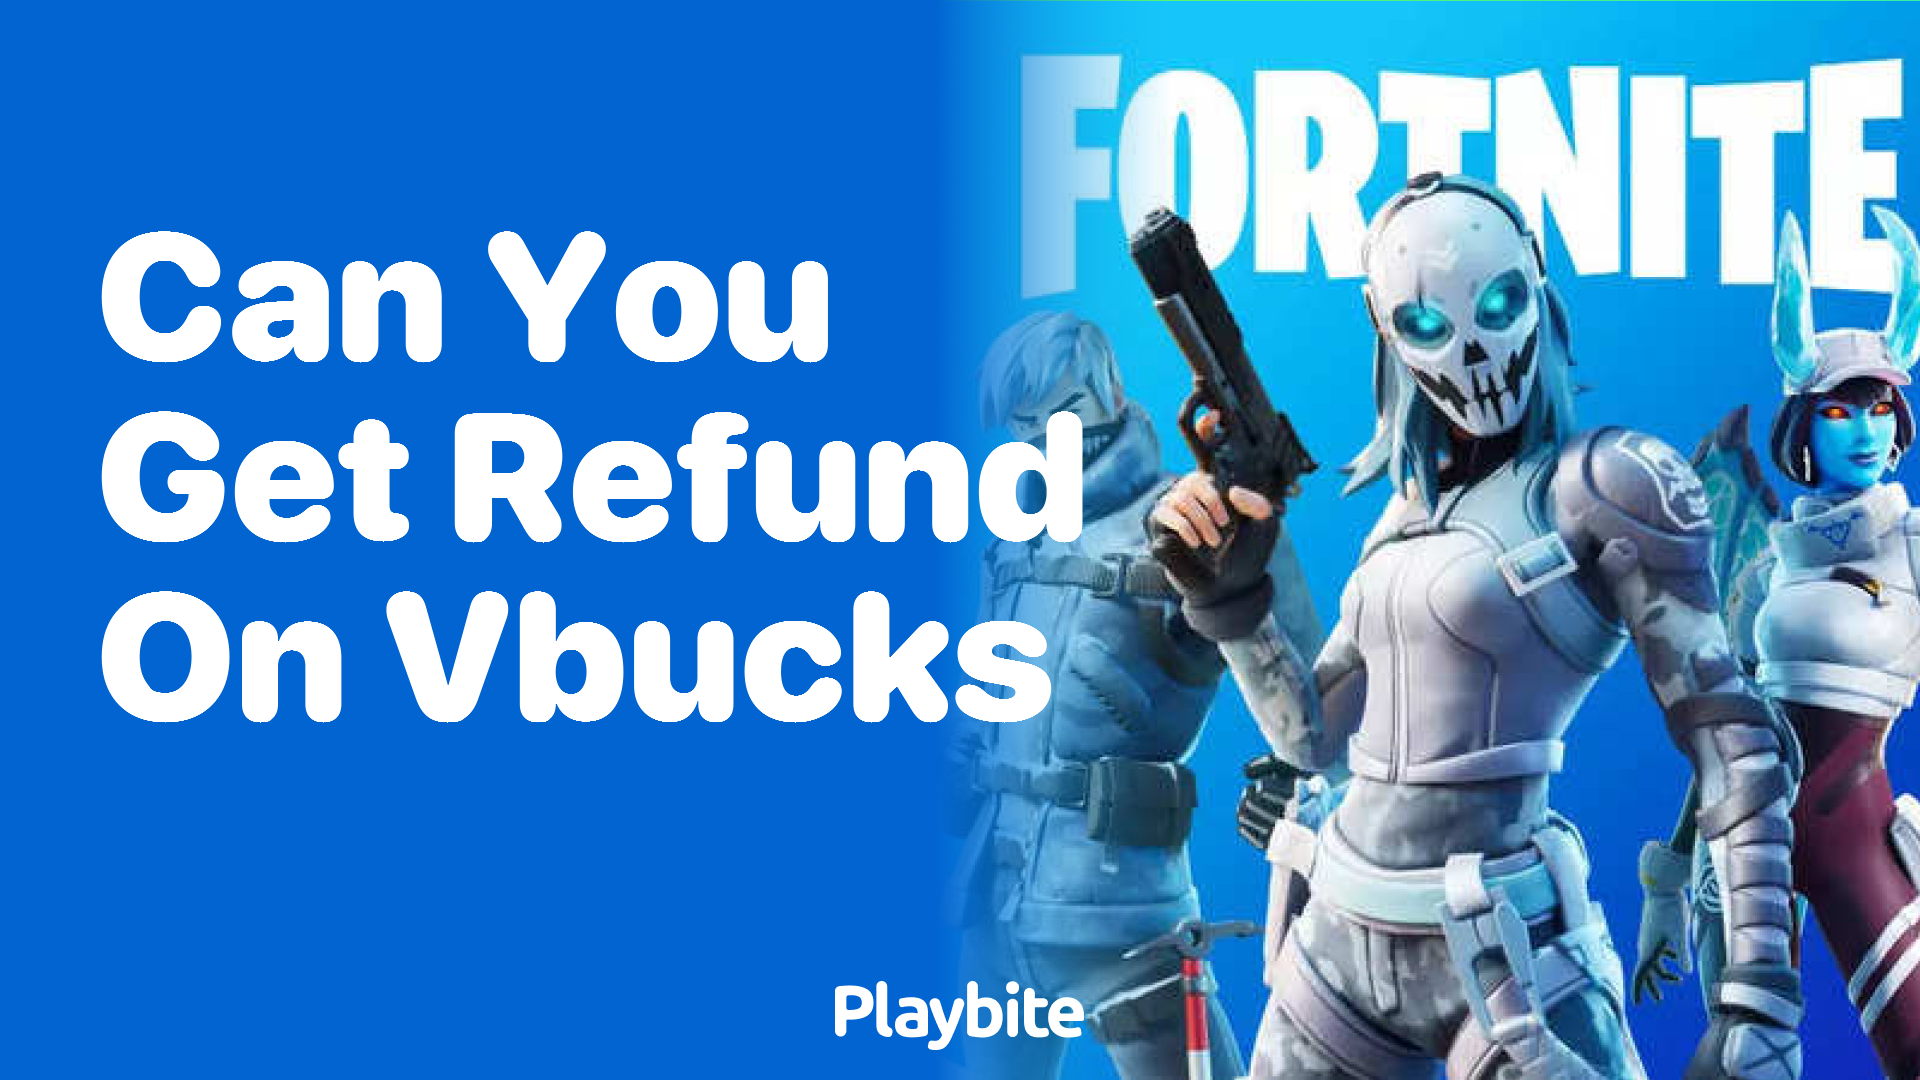 Can You Get a Refund on V-Bucks in Fortnite?